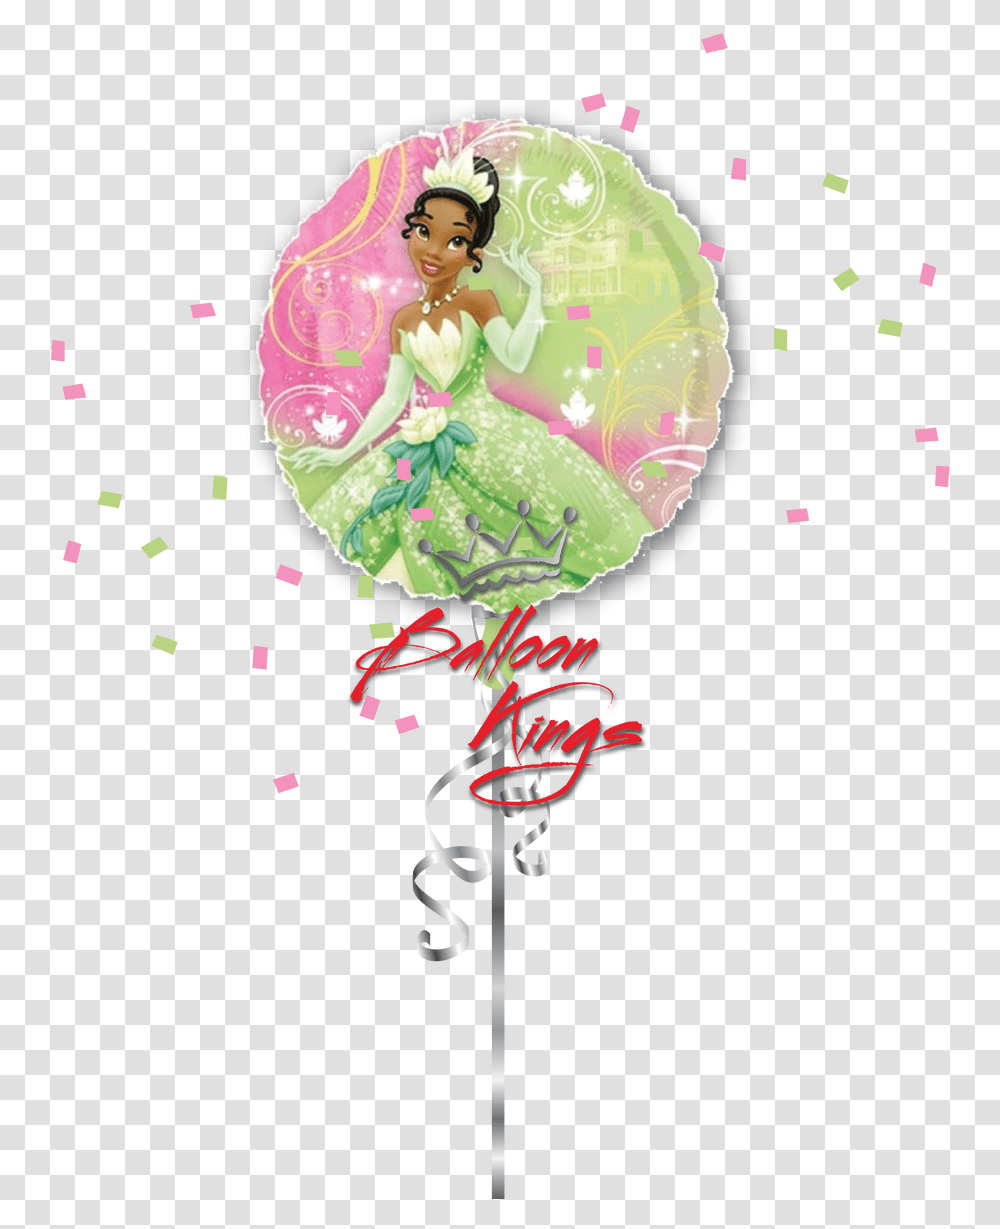 Princess And The Frog Happy Birthday Princess Tiana, Paper, Confetti Transparent Png